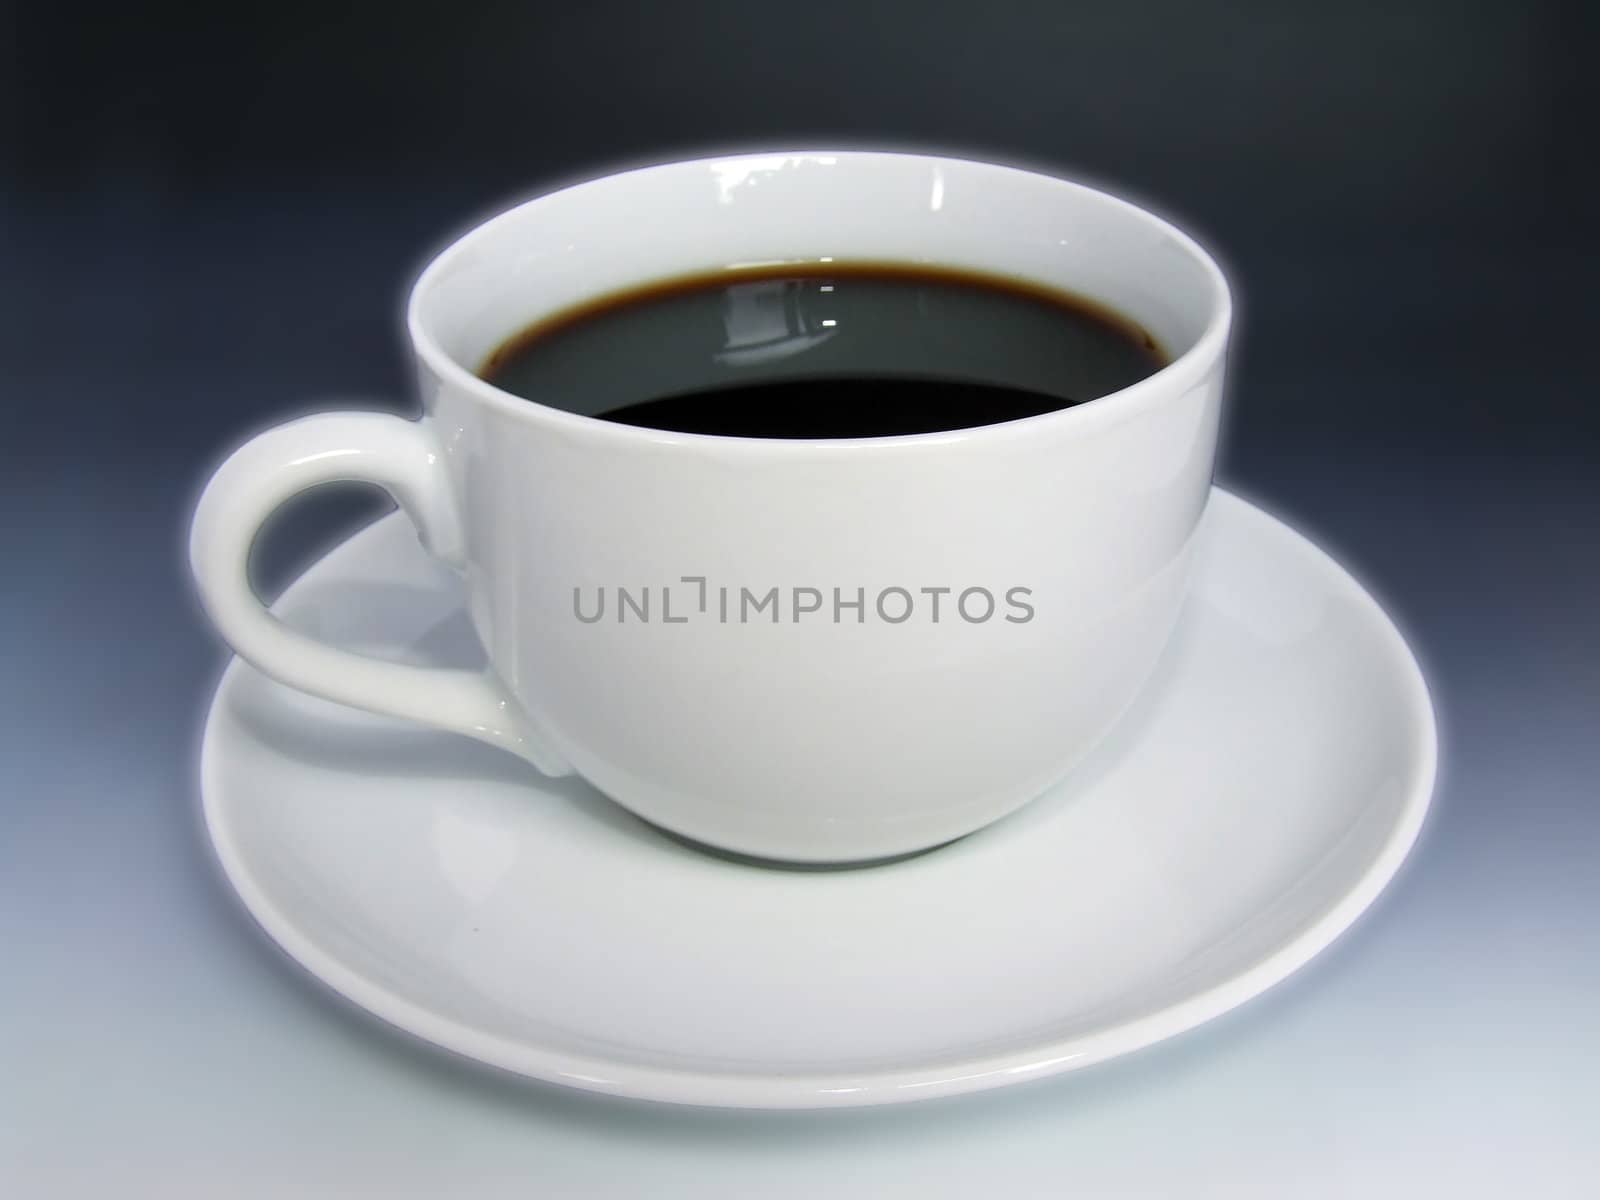 Black coffee in a white cup by anki21